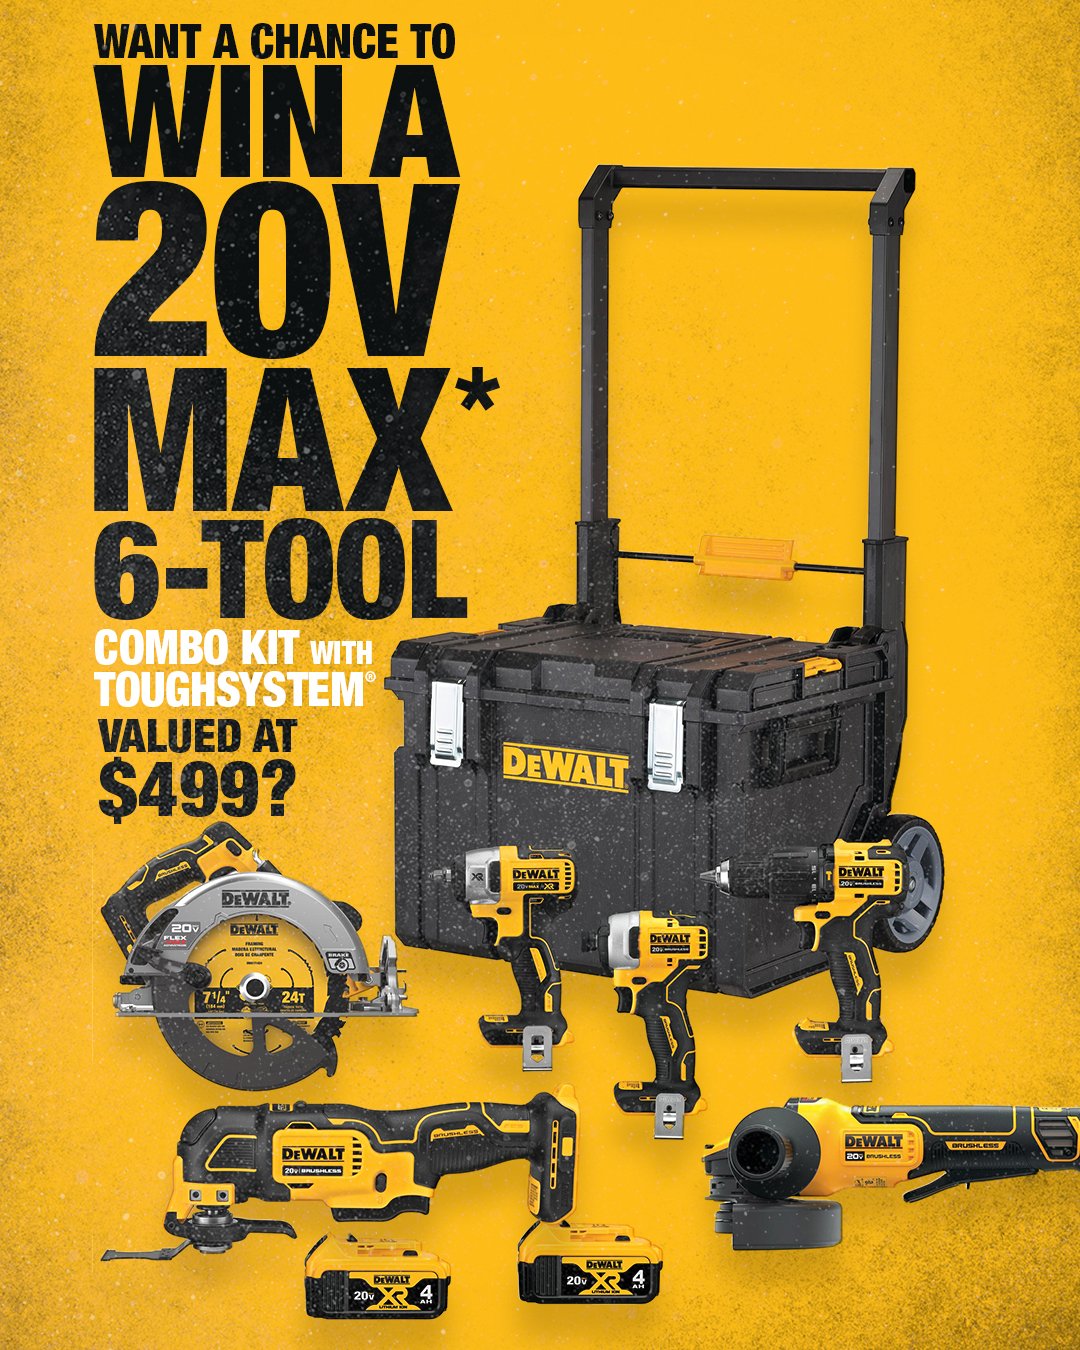 on "Want a chance to win a 20V MAX* 6-Tool Combo Kit, valued at $499? Scan the QR code on select DEWALT tools and follow the link to register. If